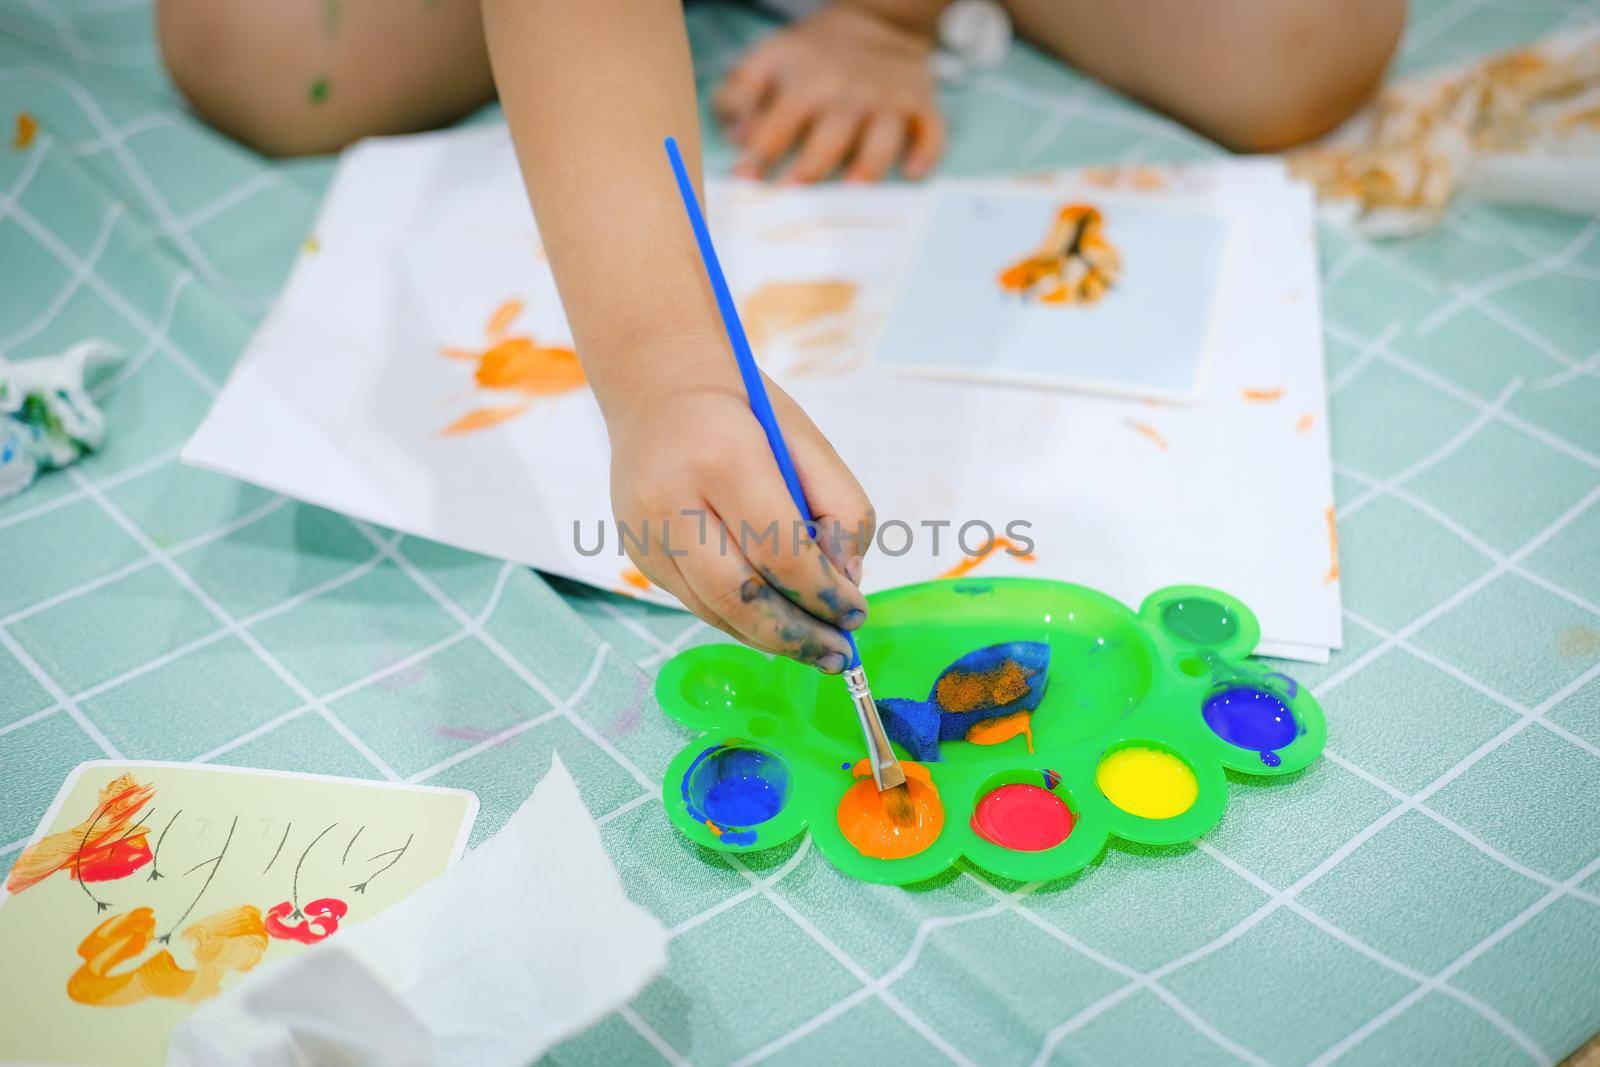 Children use watercolor brushes to create imagination and enhance their learning skills